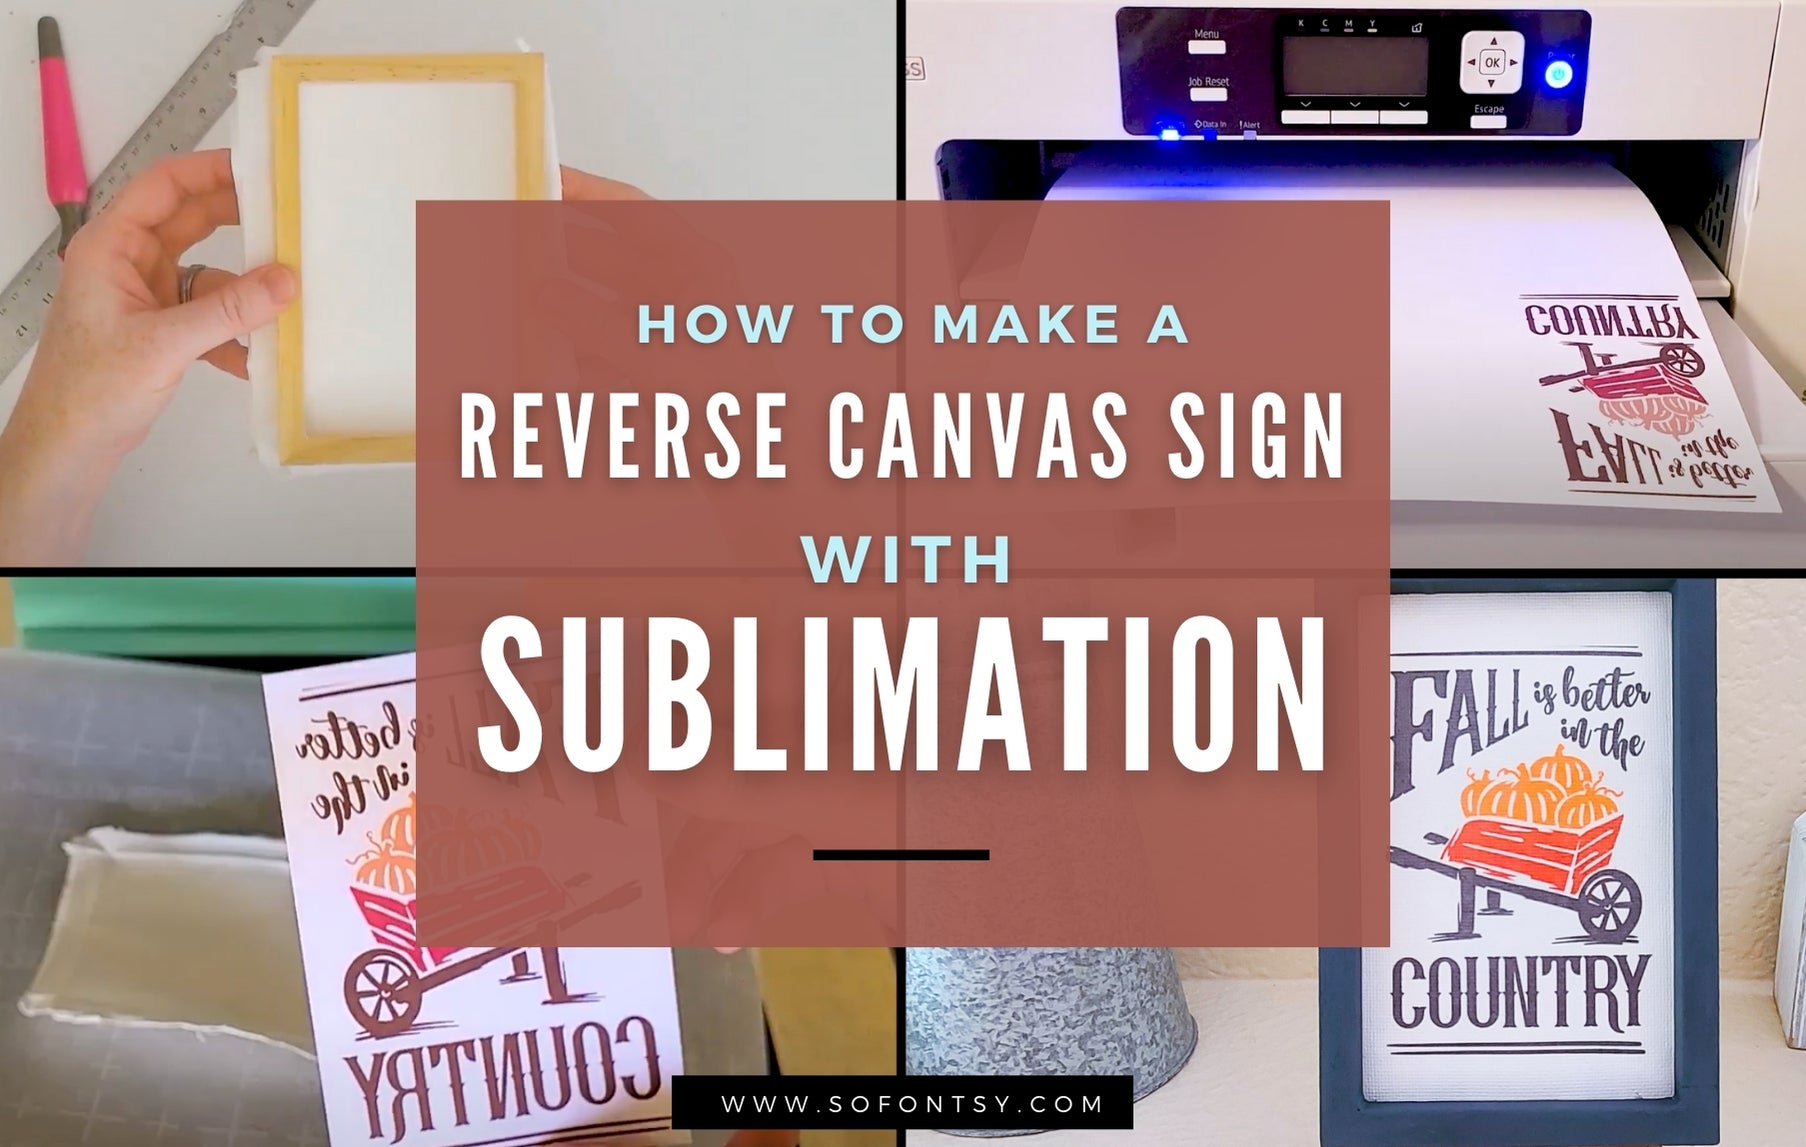 How to Make a Reverse Canvas Sign with Sublimation - So Fontsy